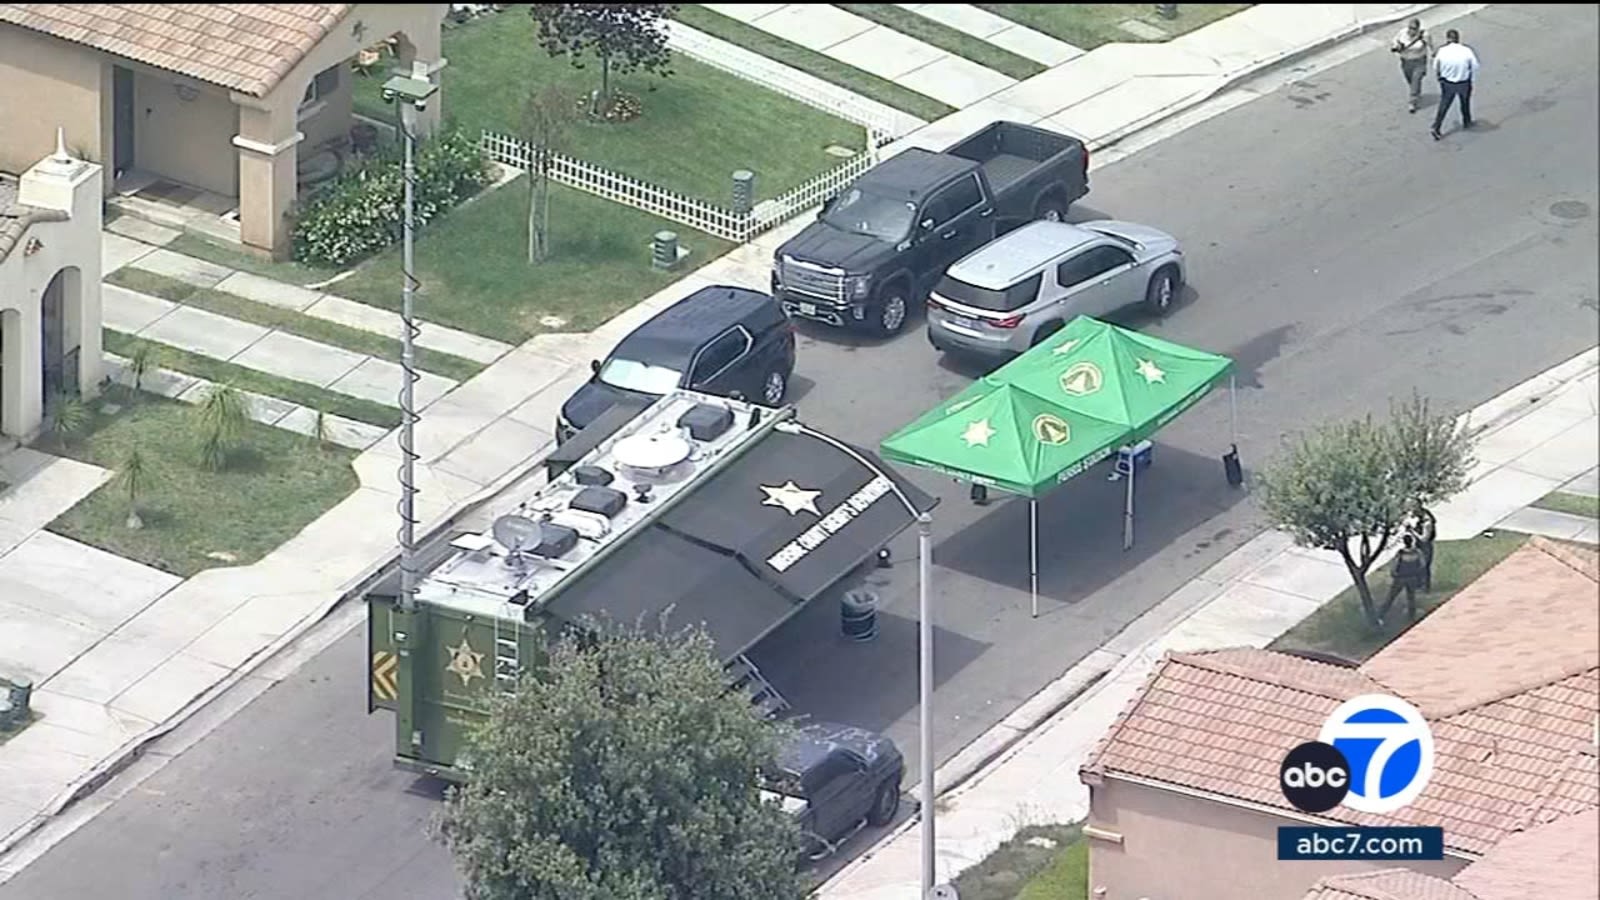 Report of shooting at Perris home prompts Riverside County Sheriff's Office response